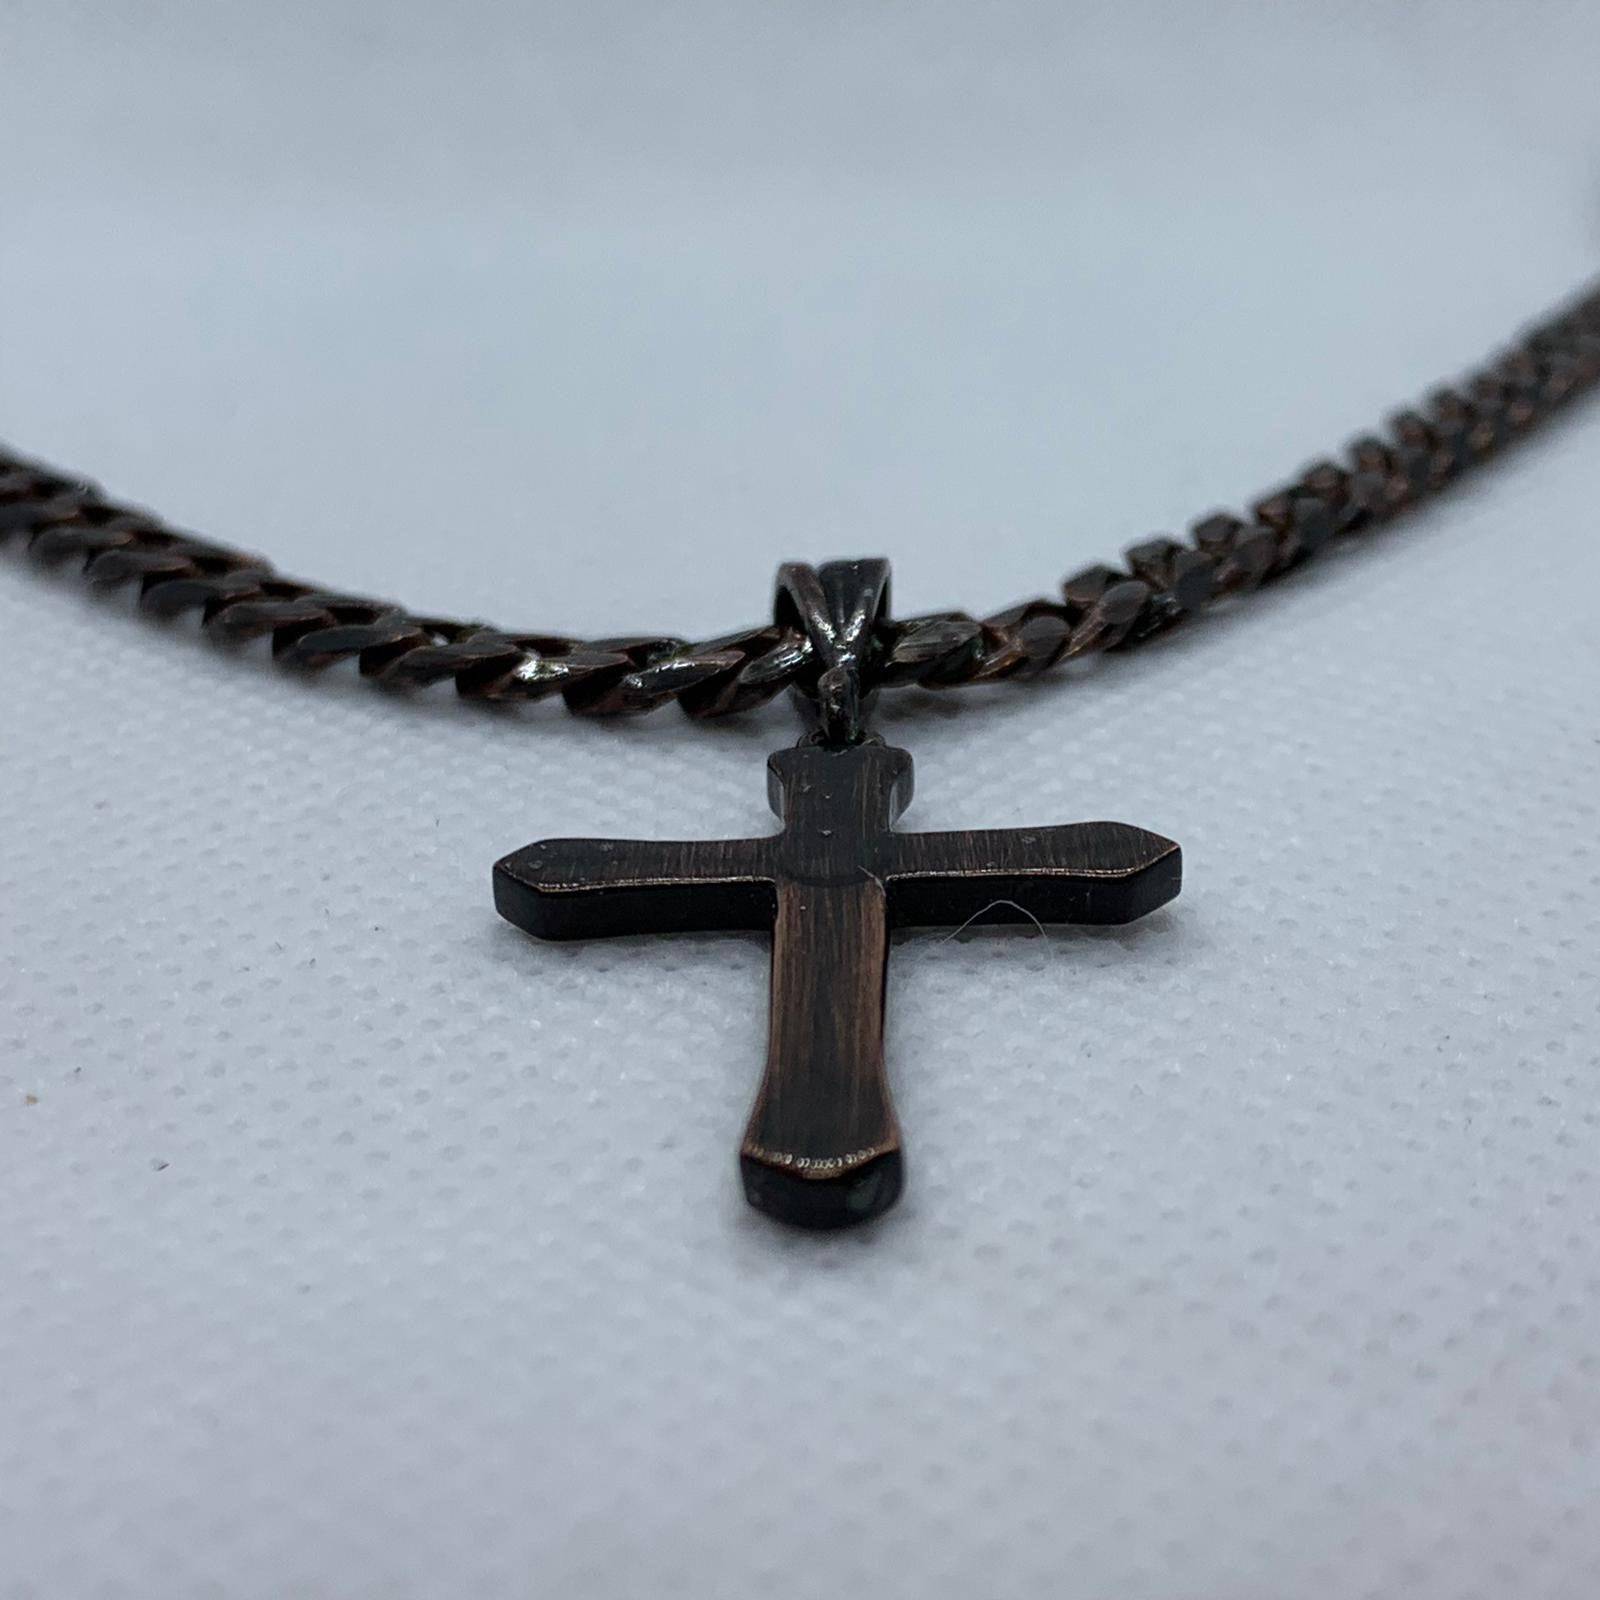 Twister Mens Necklace Western Cross Inlaid Tooled Leather Silver Box Chain  22 in | eBay